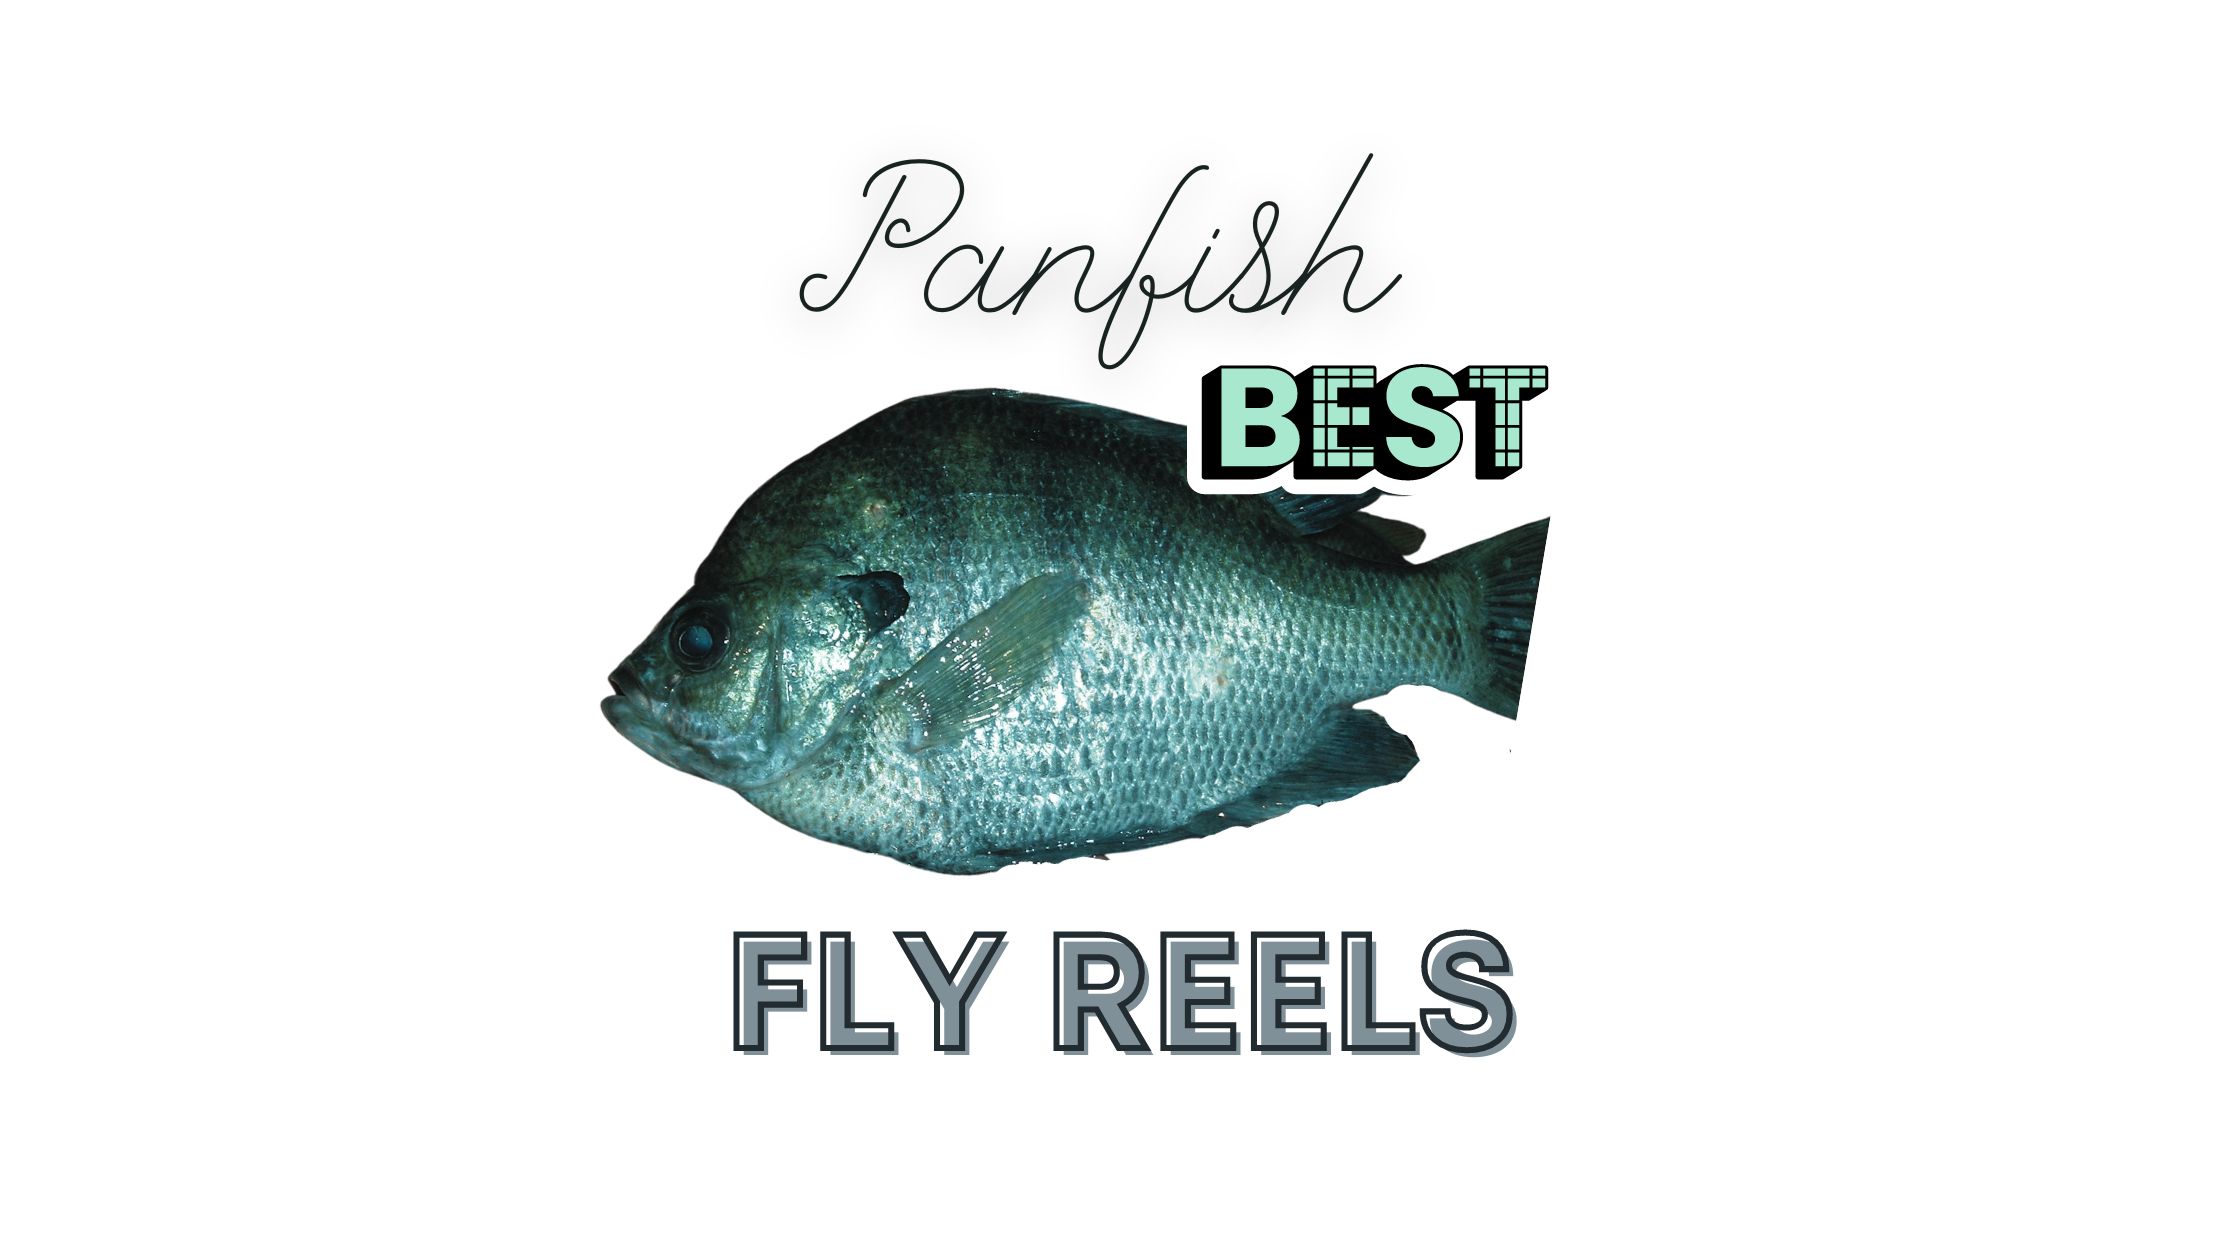 The 6 Best Fly Reels for The Panfish In 2022